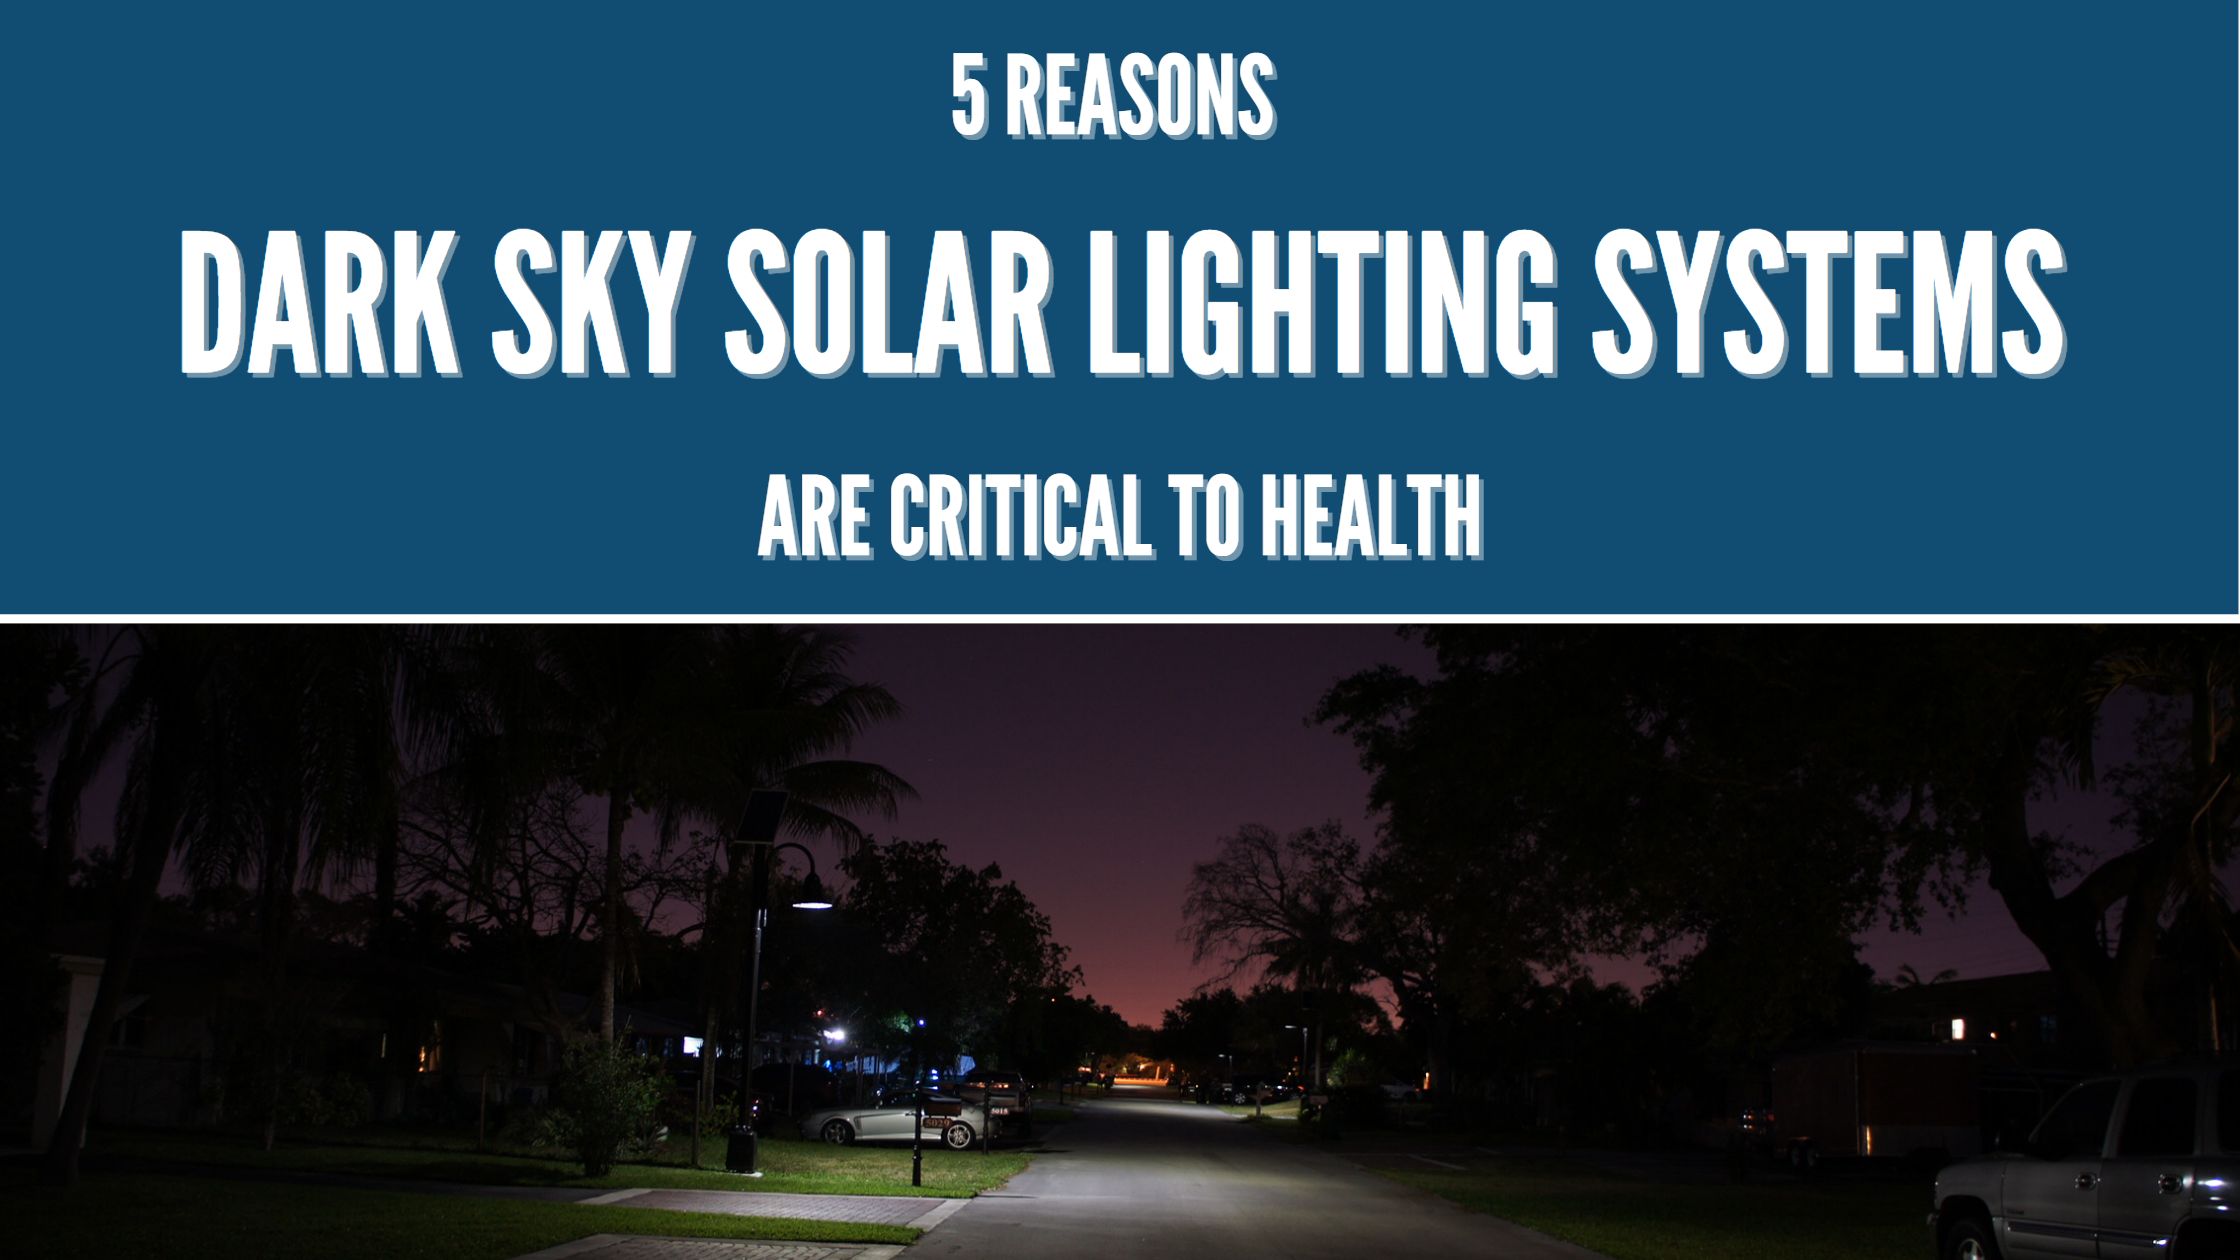 5 Reasons Dark Sky Solar Lighting Systems Are Critical to Health